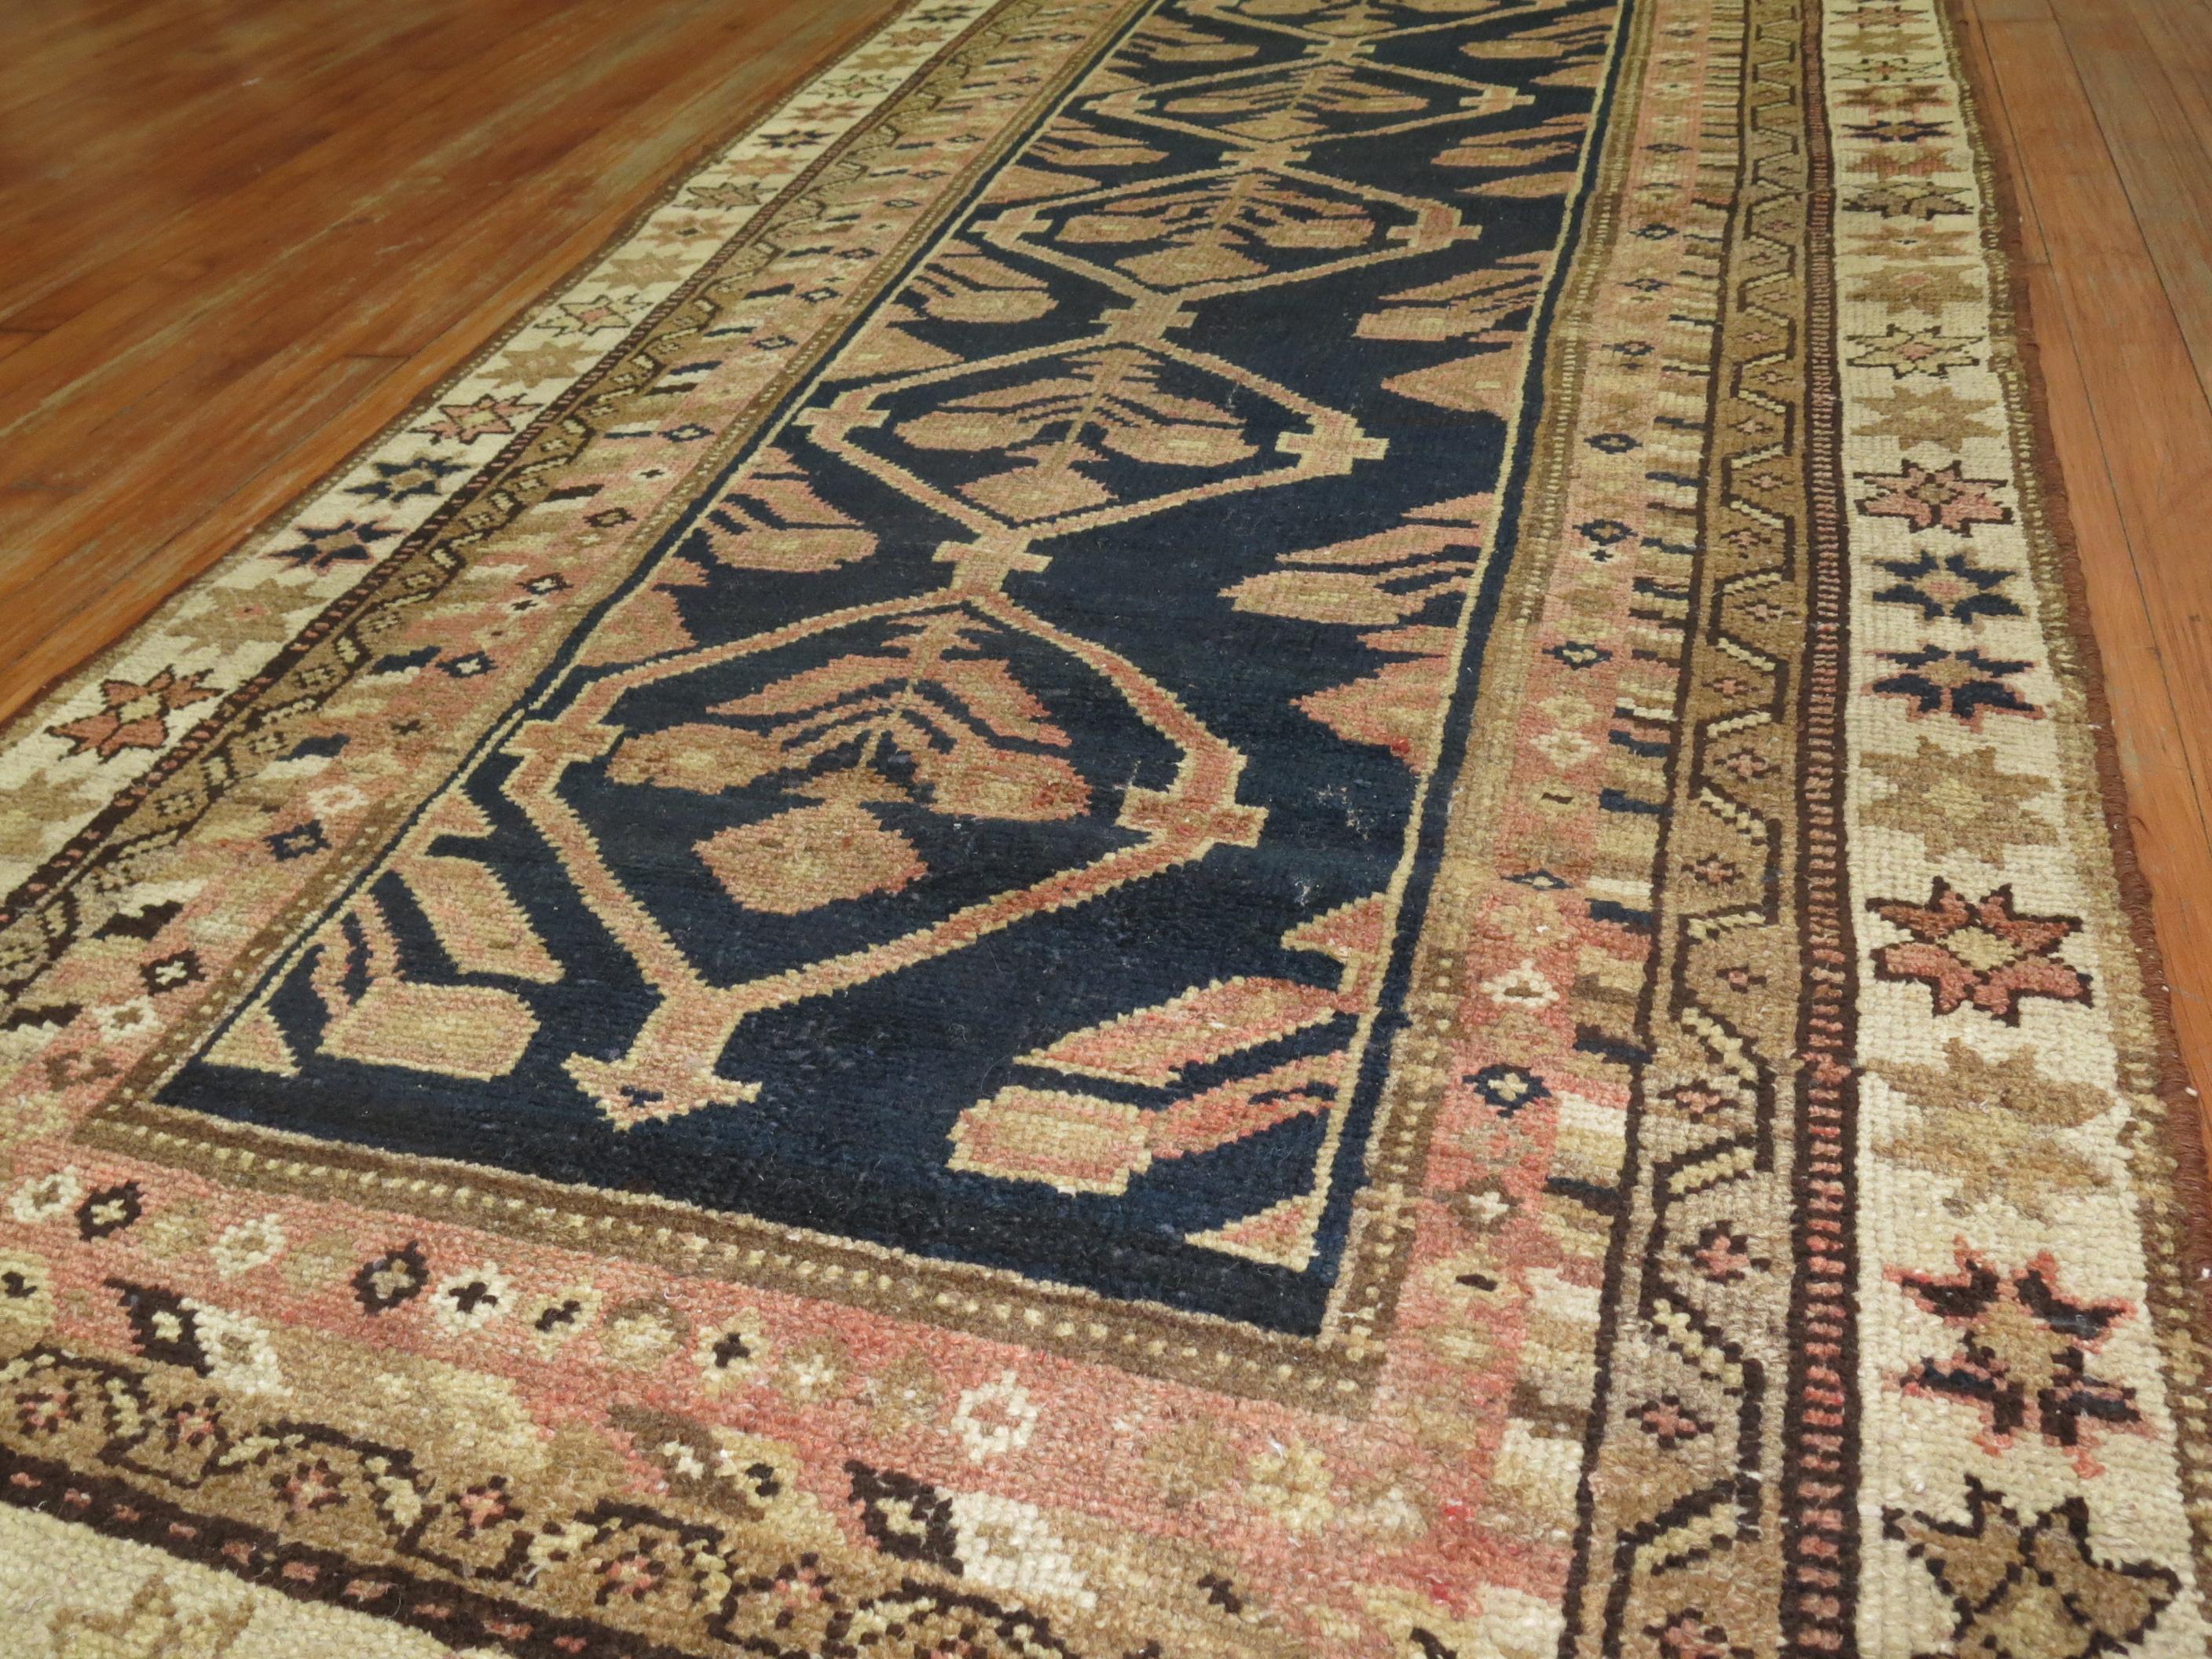 A Persian Hamadan runner.

Hamedan is one of the oldest cities in Iran and rugs are known to be one of the most durable Persian rugs, lasting generations of heavy wear. Almost all rugs from this region were woven on a cotton foundation using Hardy